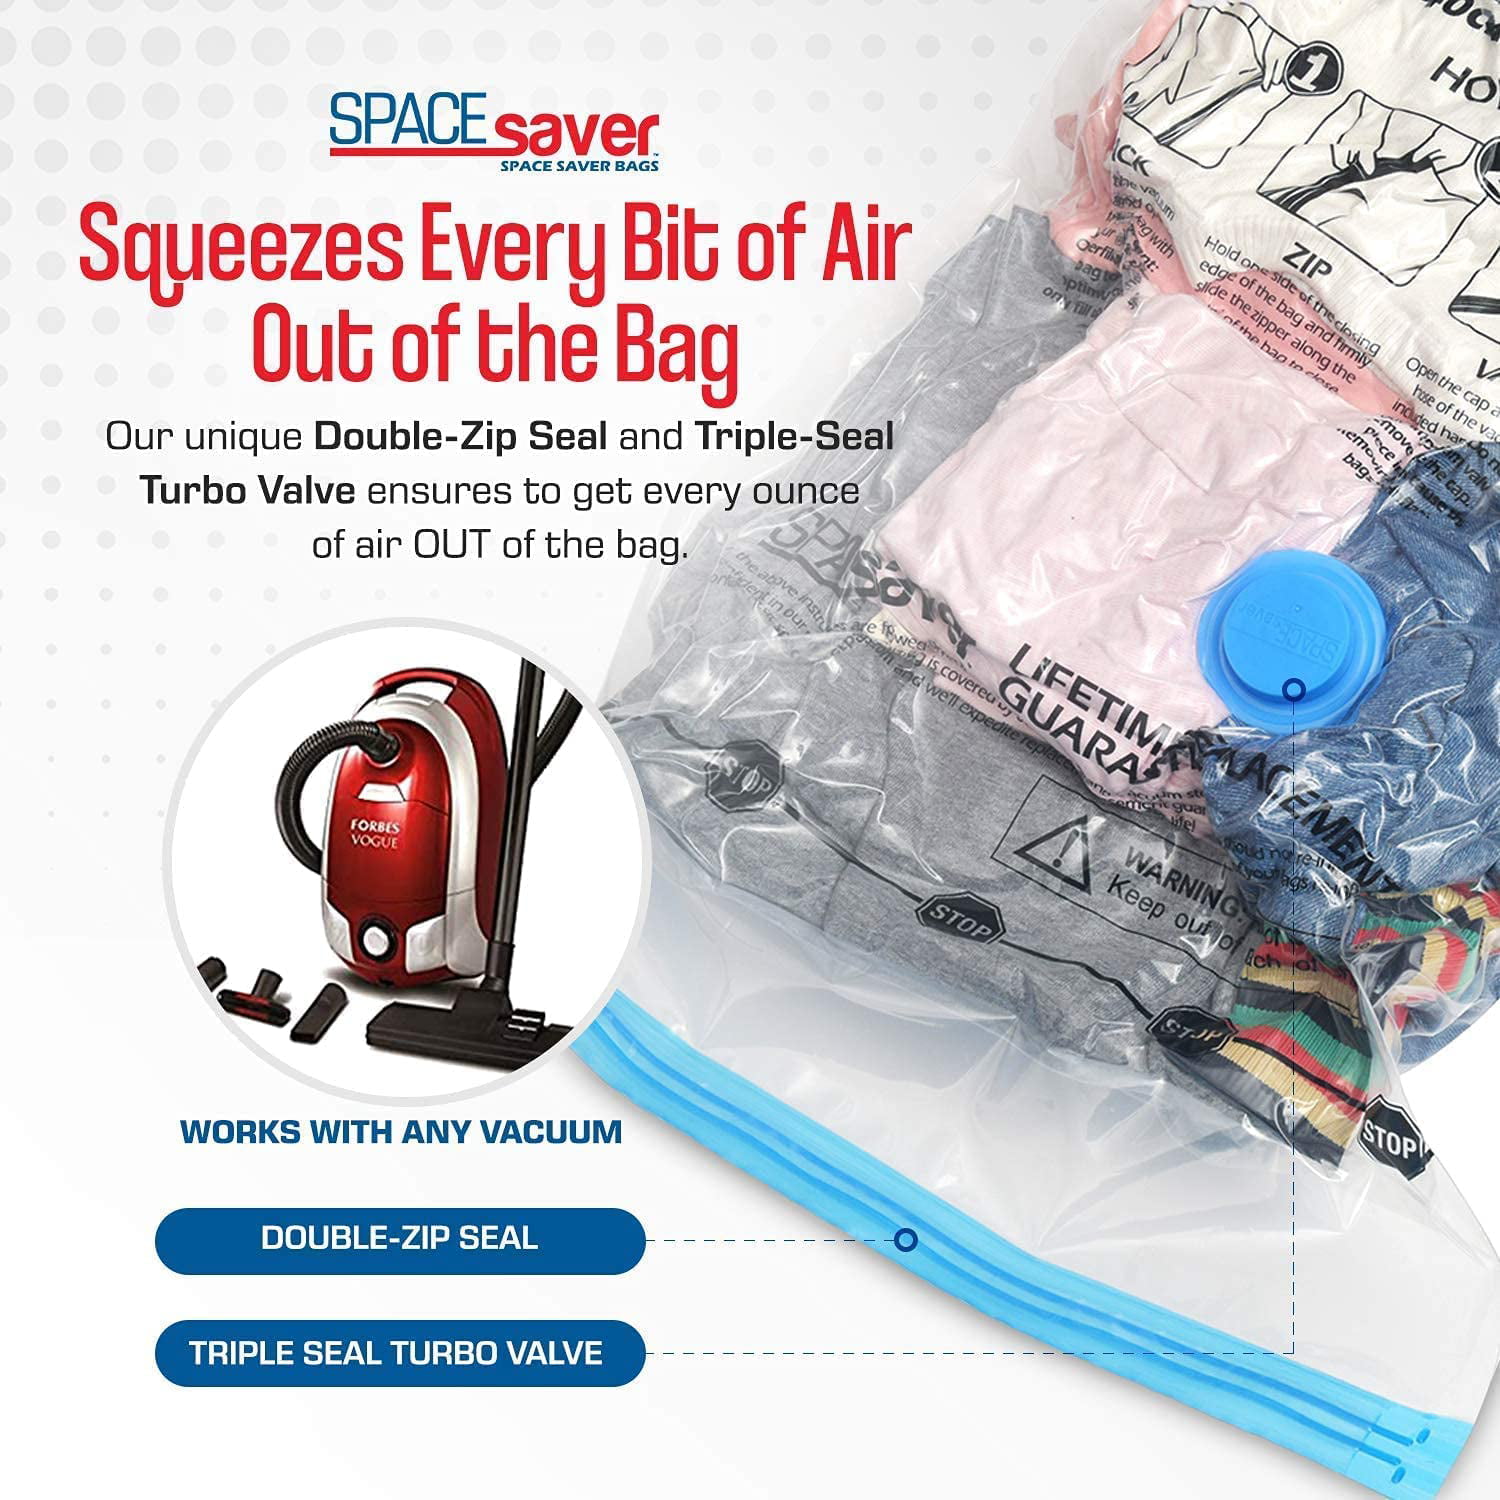 Save 20% On Spacesaver Vacuum Storage Bags With This Exclusive Deal - CNET